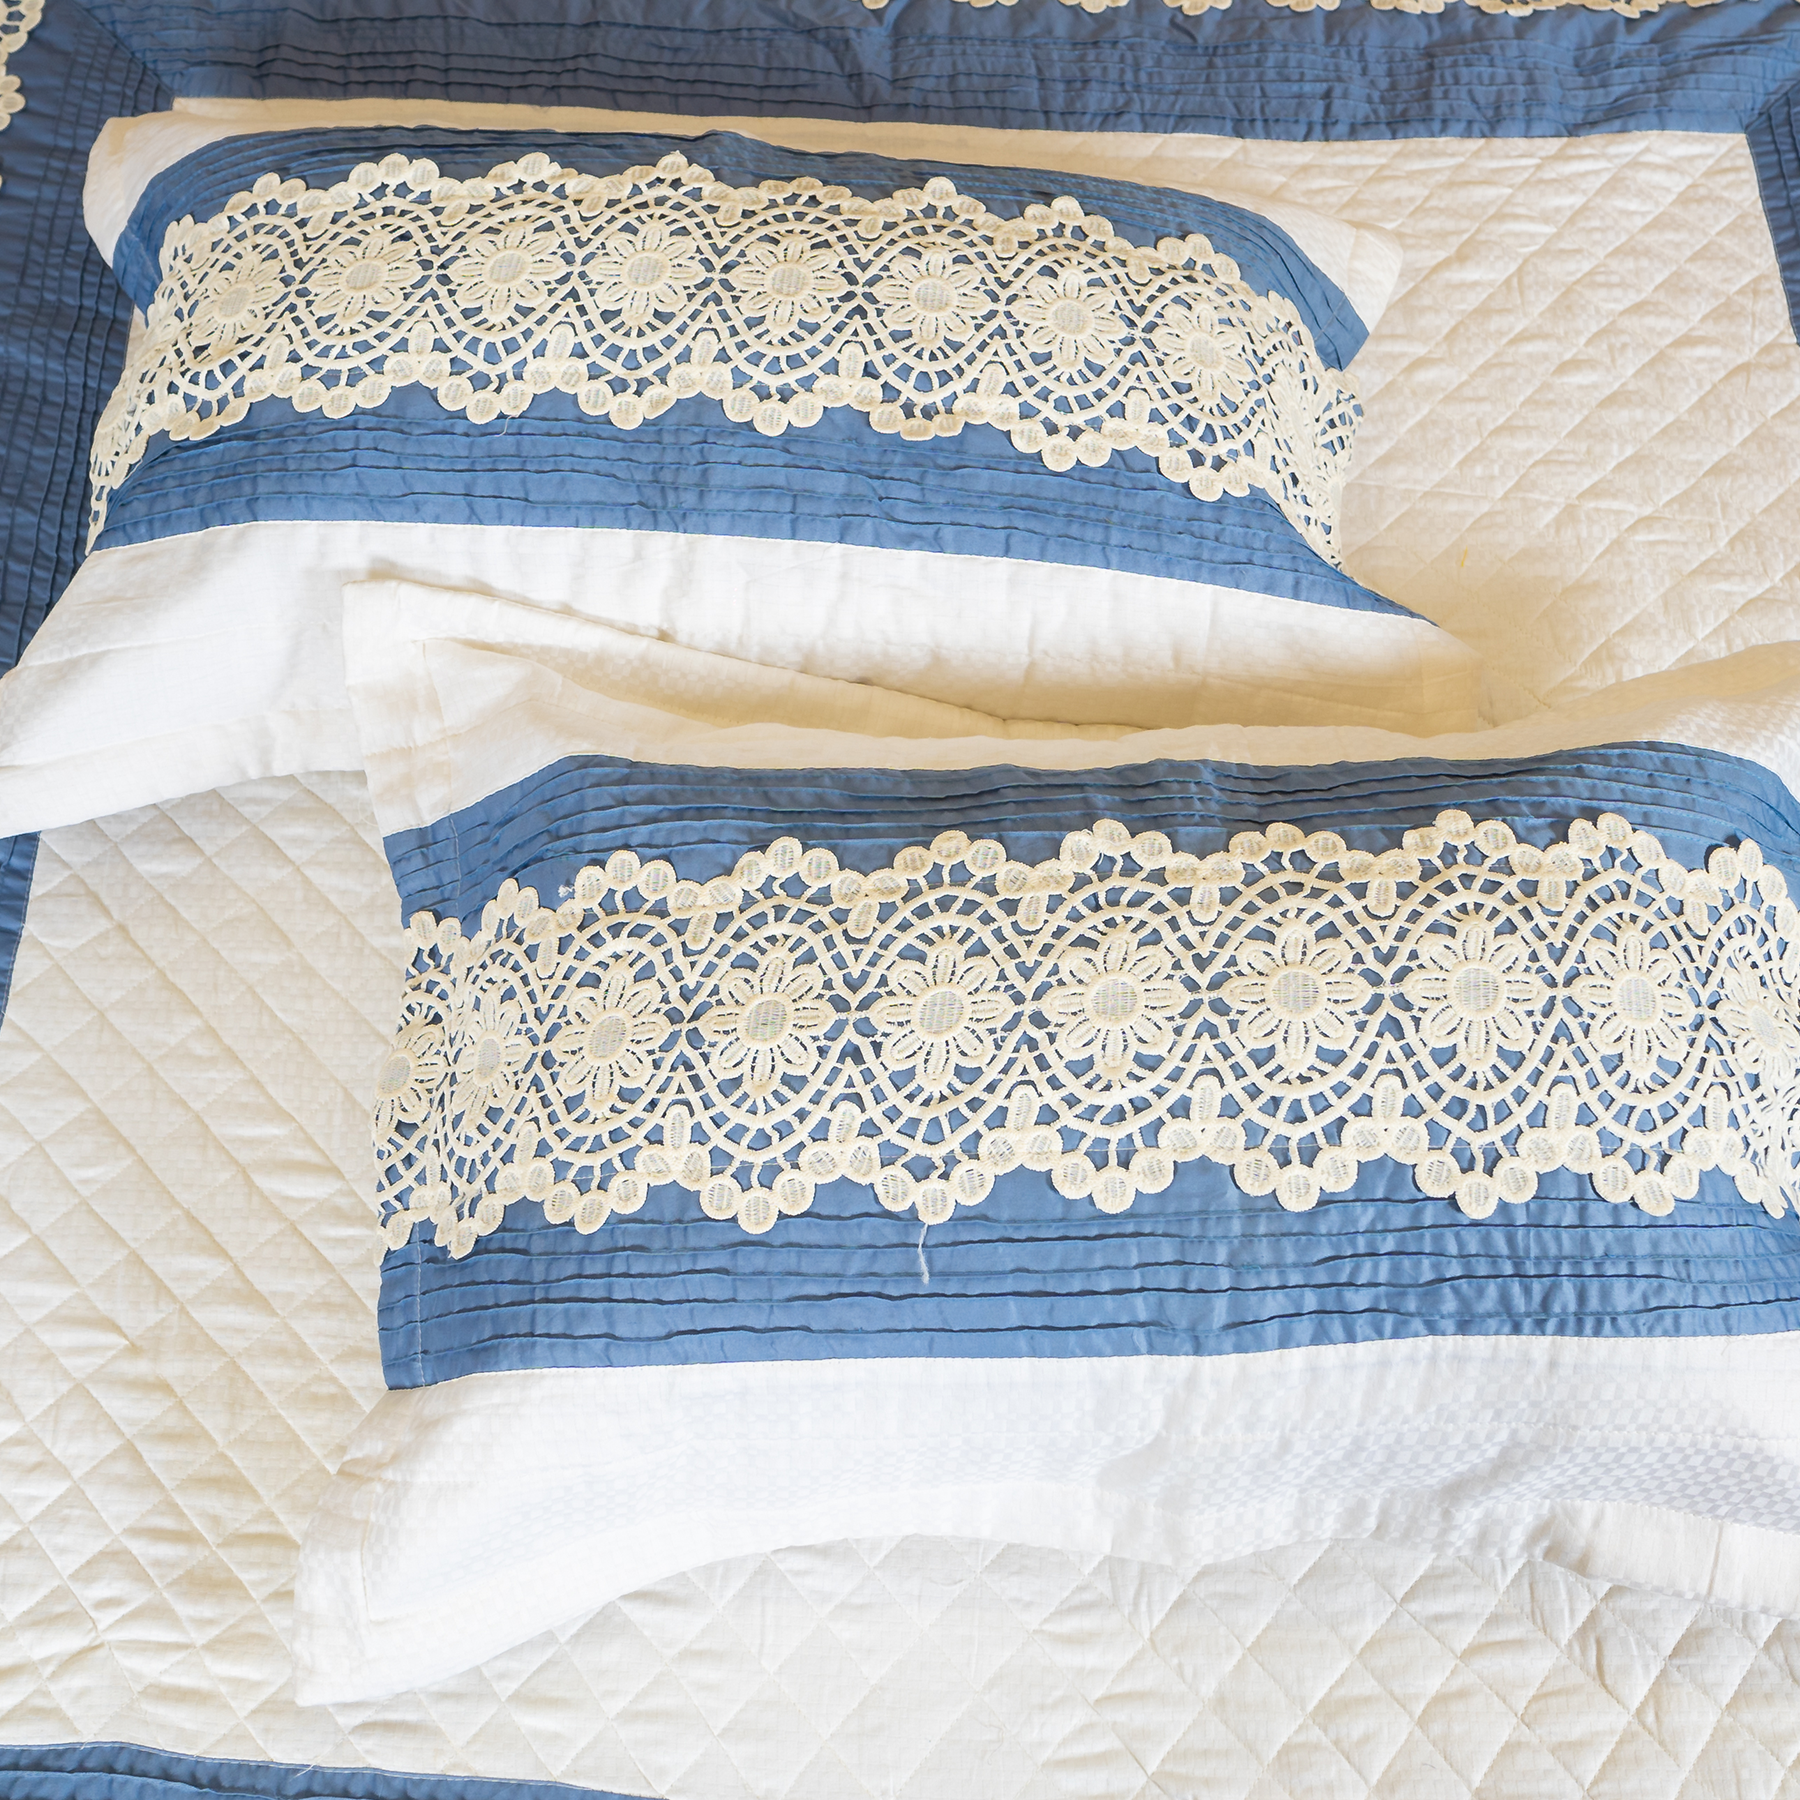 The LuxeLife White Cotton quilted Bedcover with lace